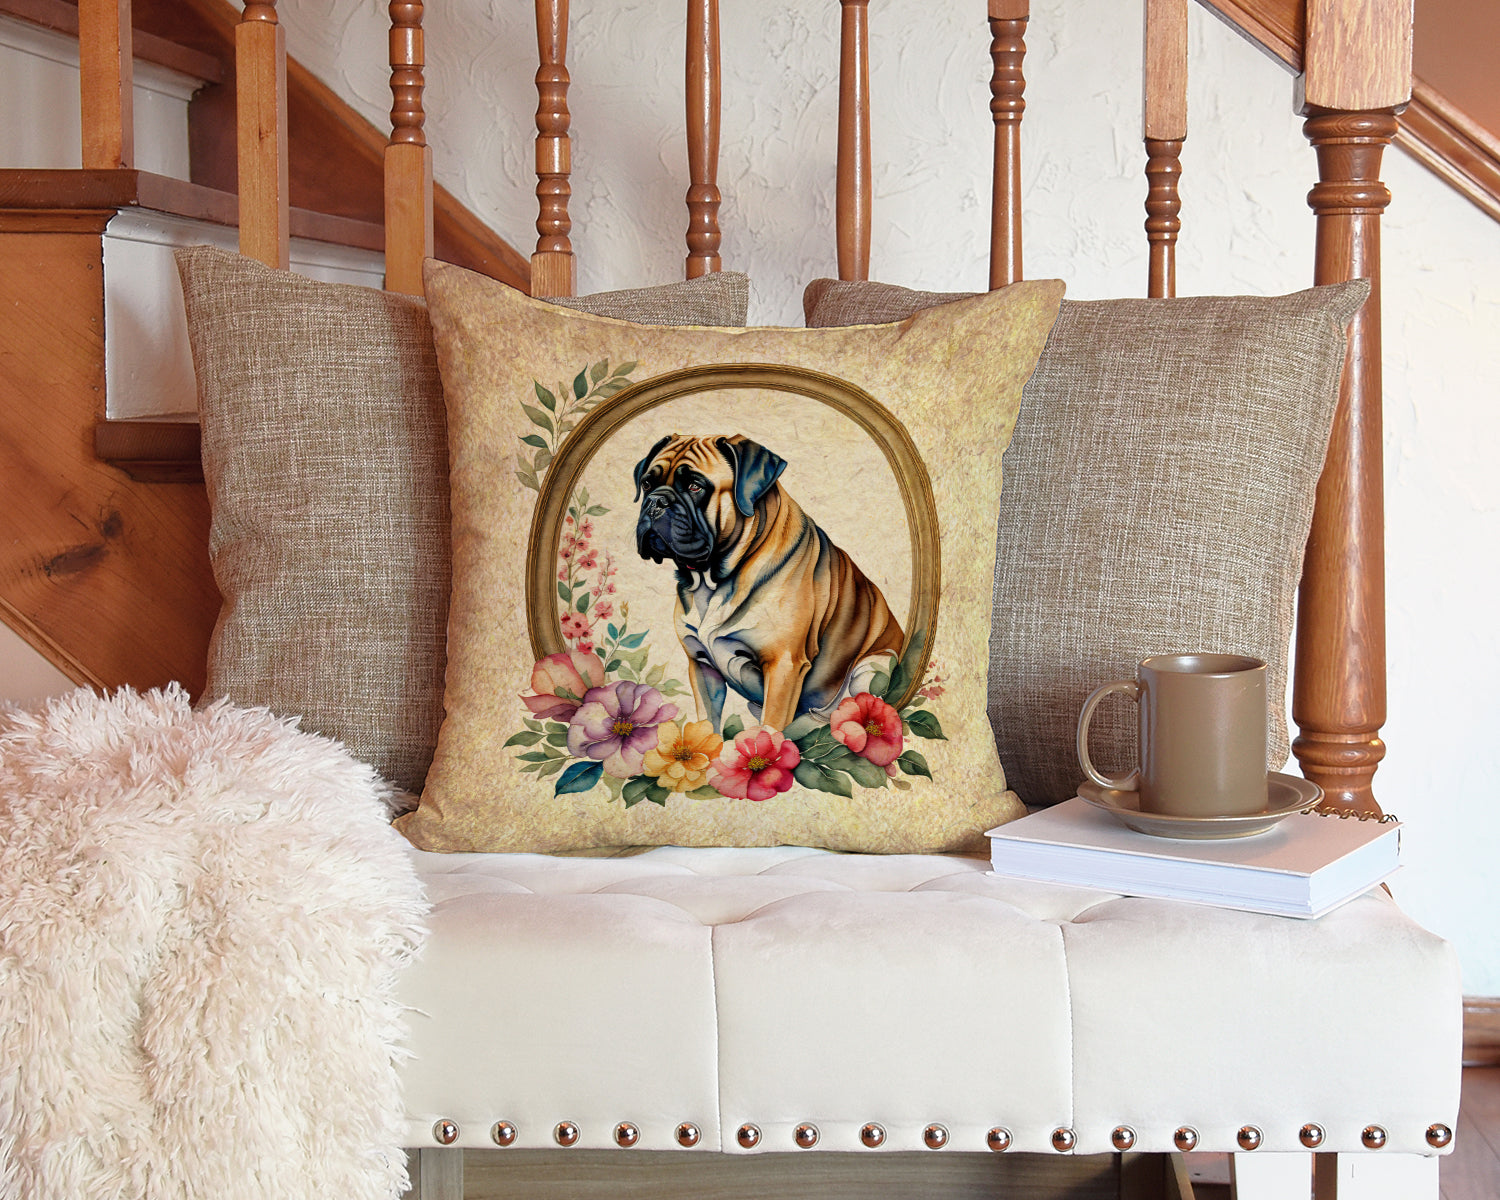 Mastiff and Flowers Fabric Decorative Pillow  the-store.com.